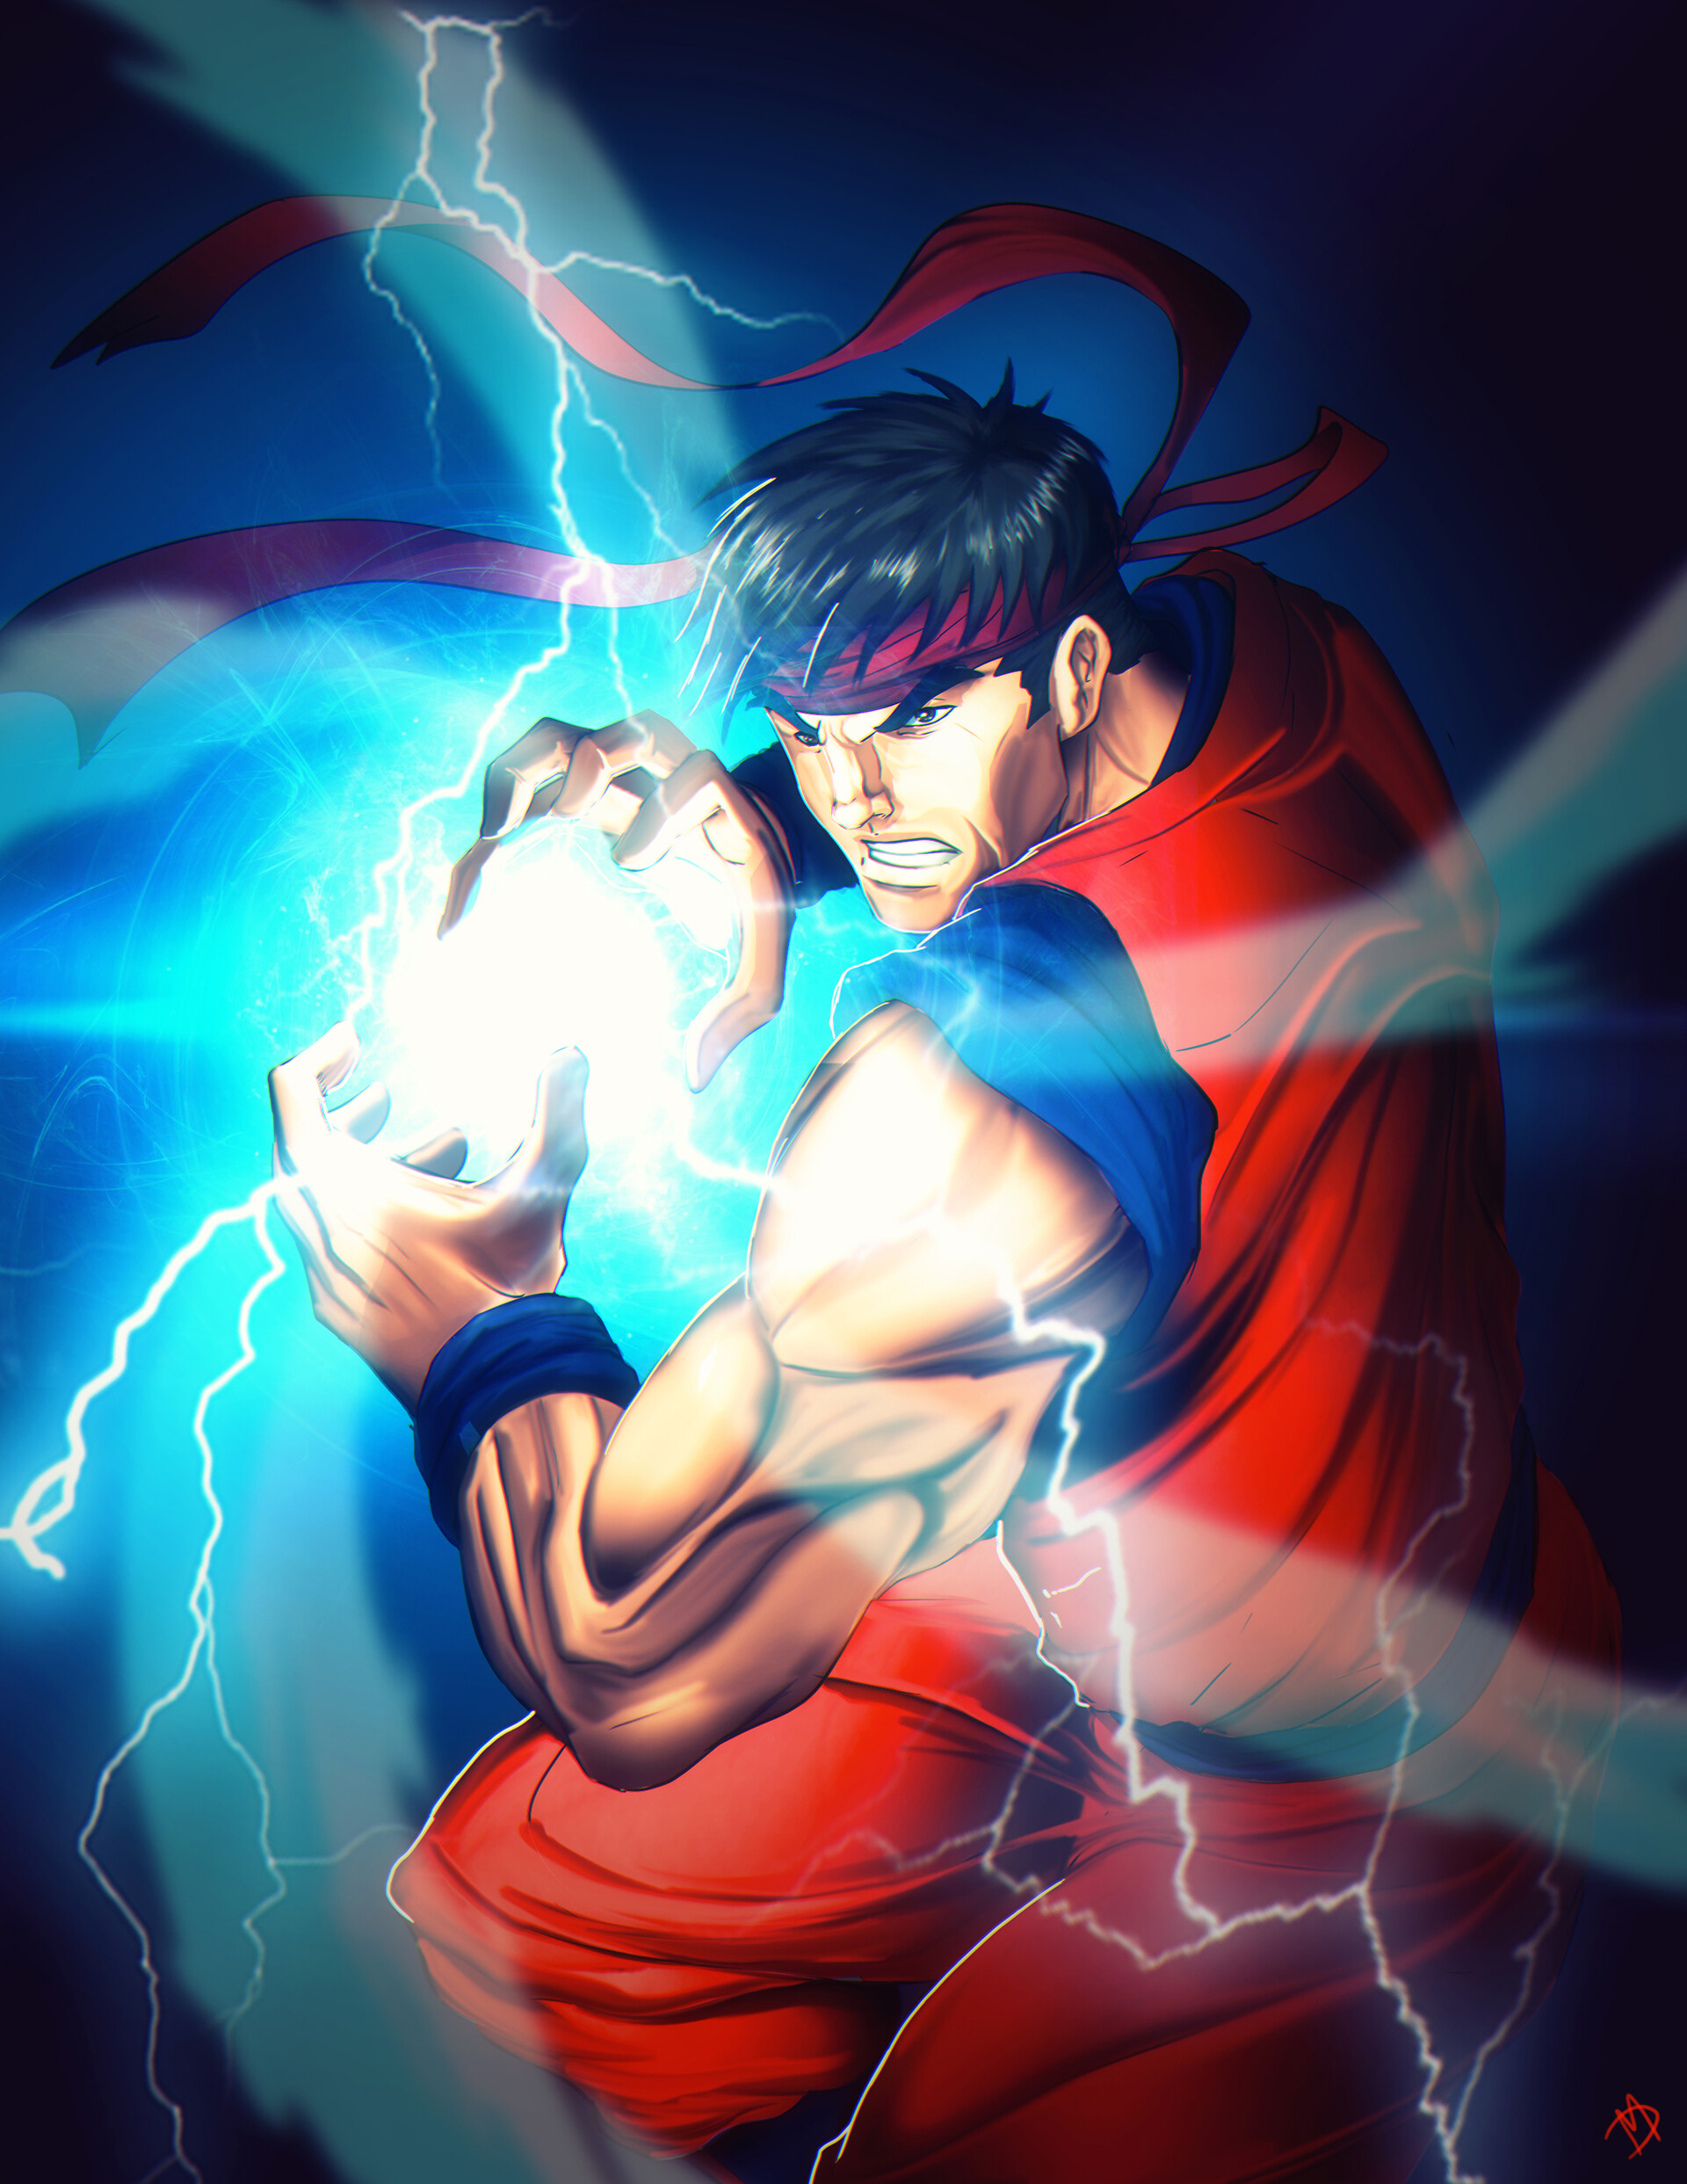 Lexica - anime of messi as street fighter ryu holding hadouken